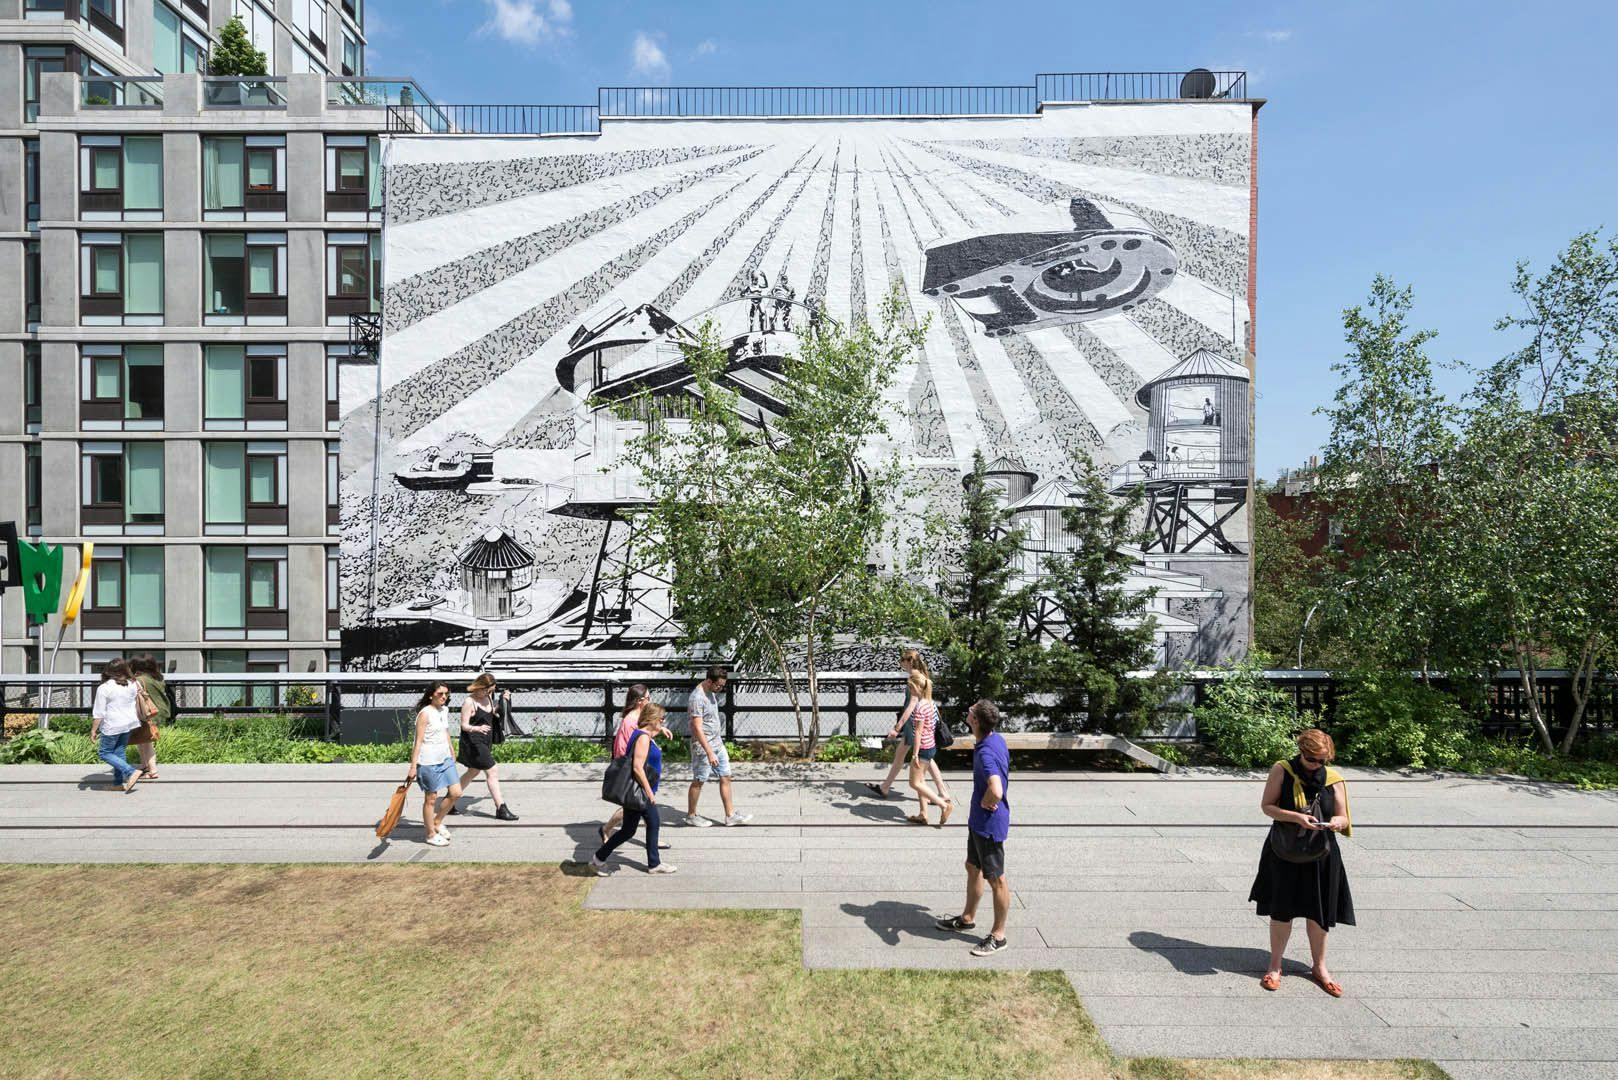 View of Above the Line mural on The High Line in New York, dated 2015.